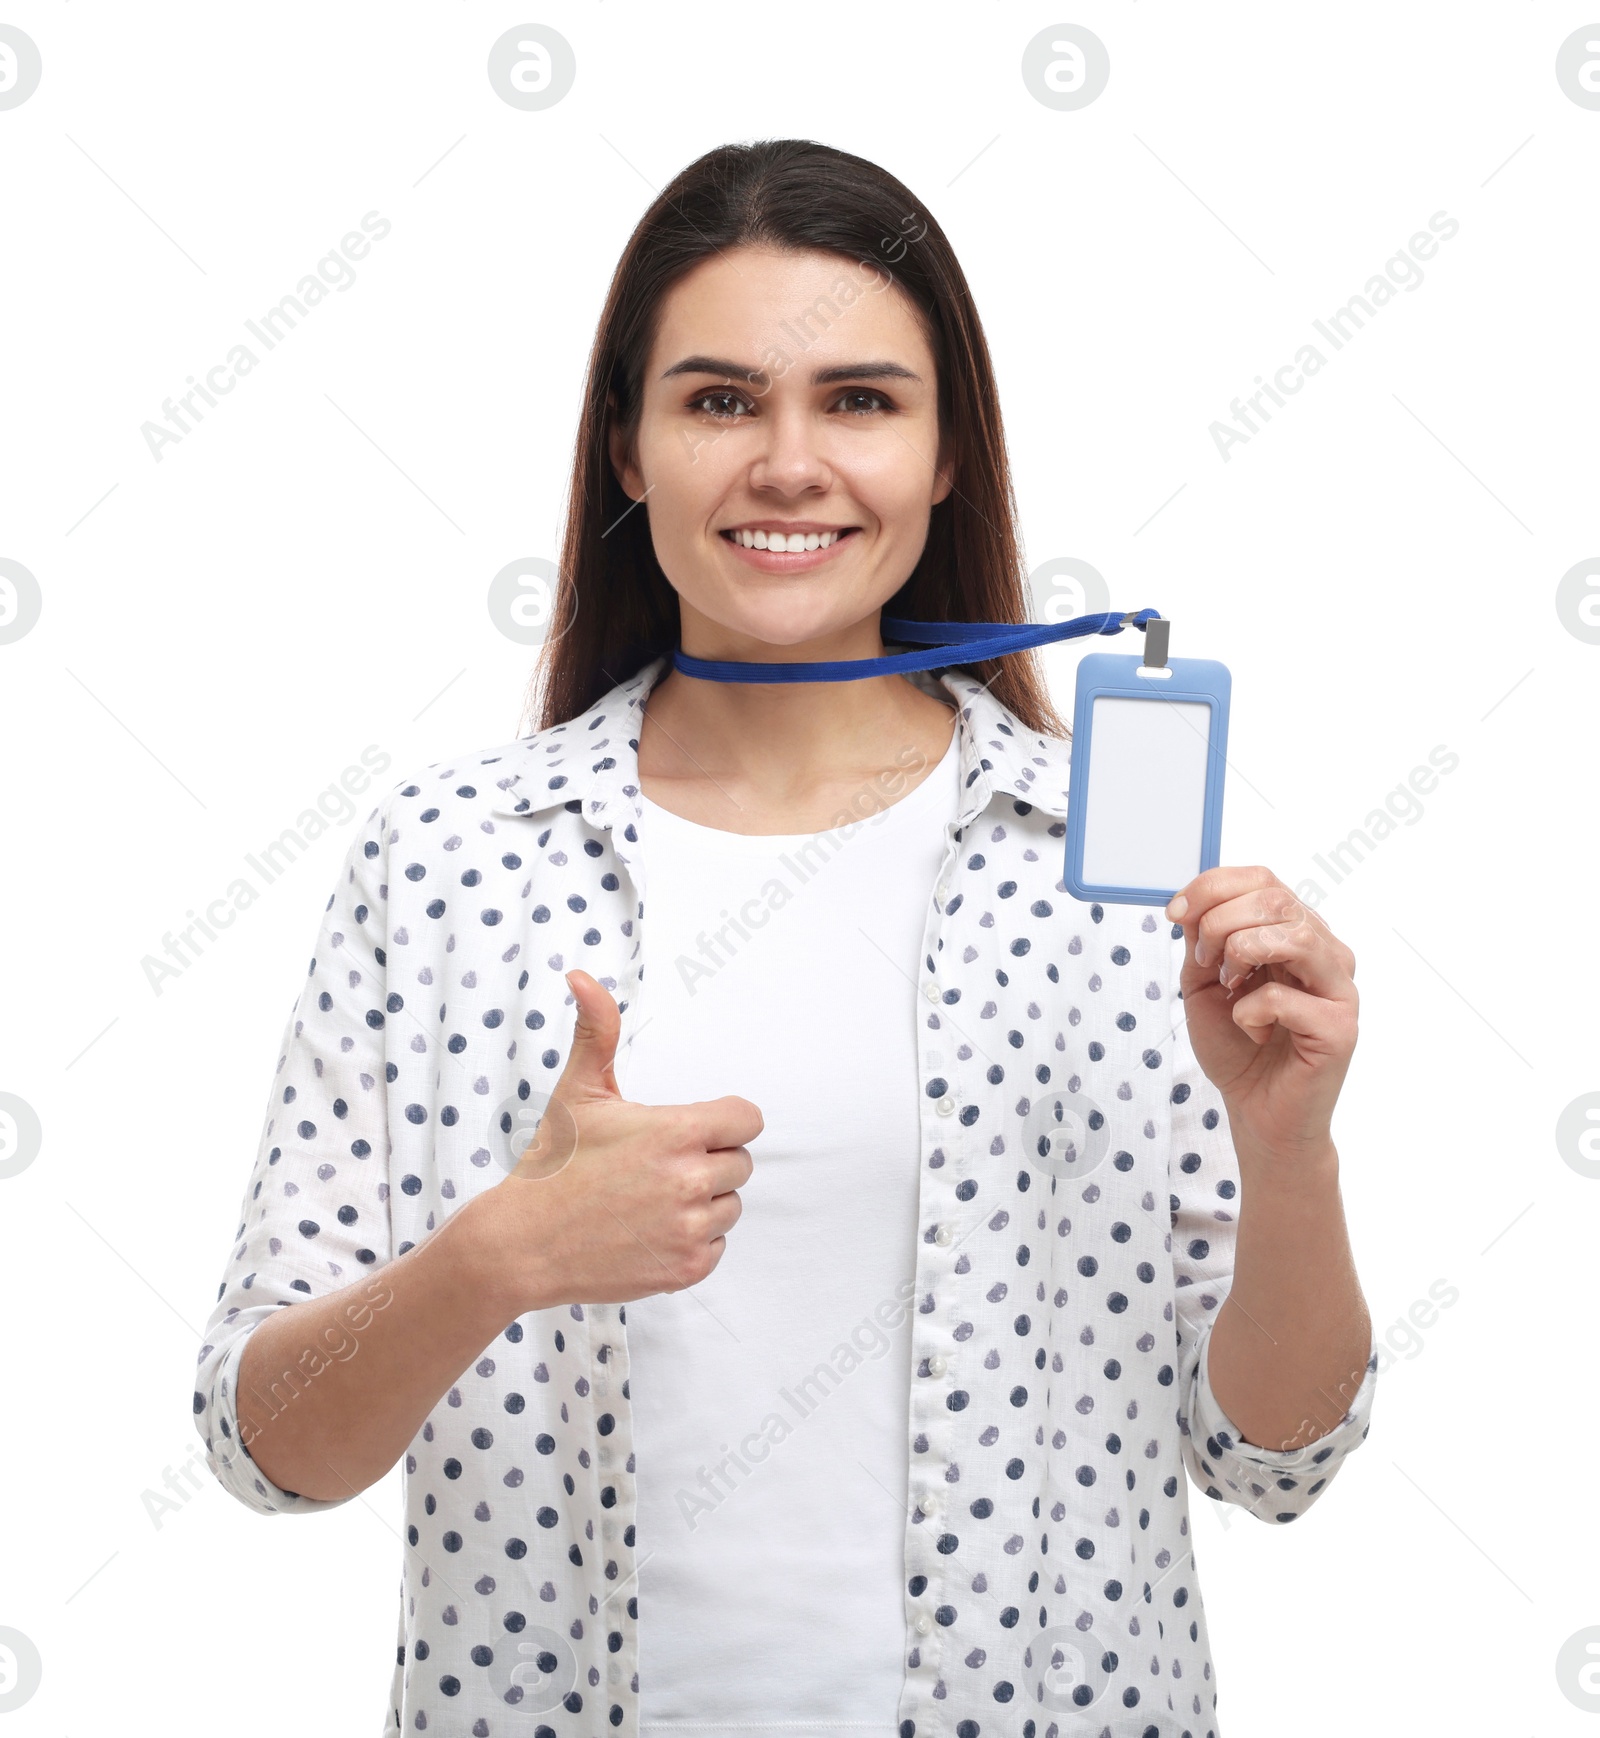 Photo of Happy woman with vip pass badge showing thumb up on white background